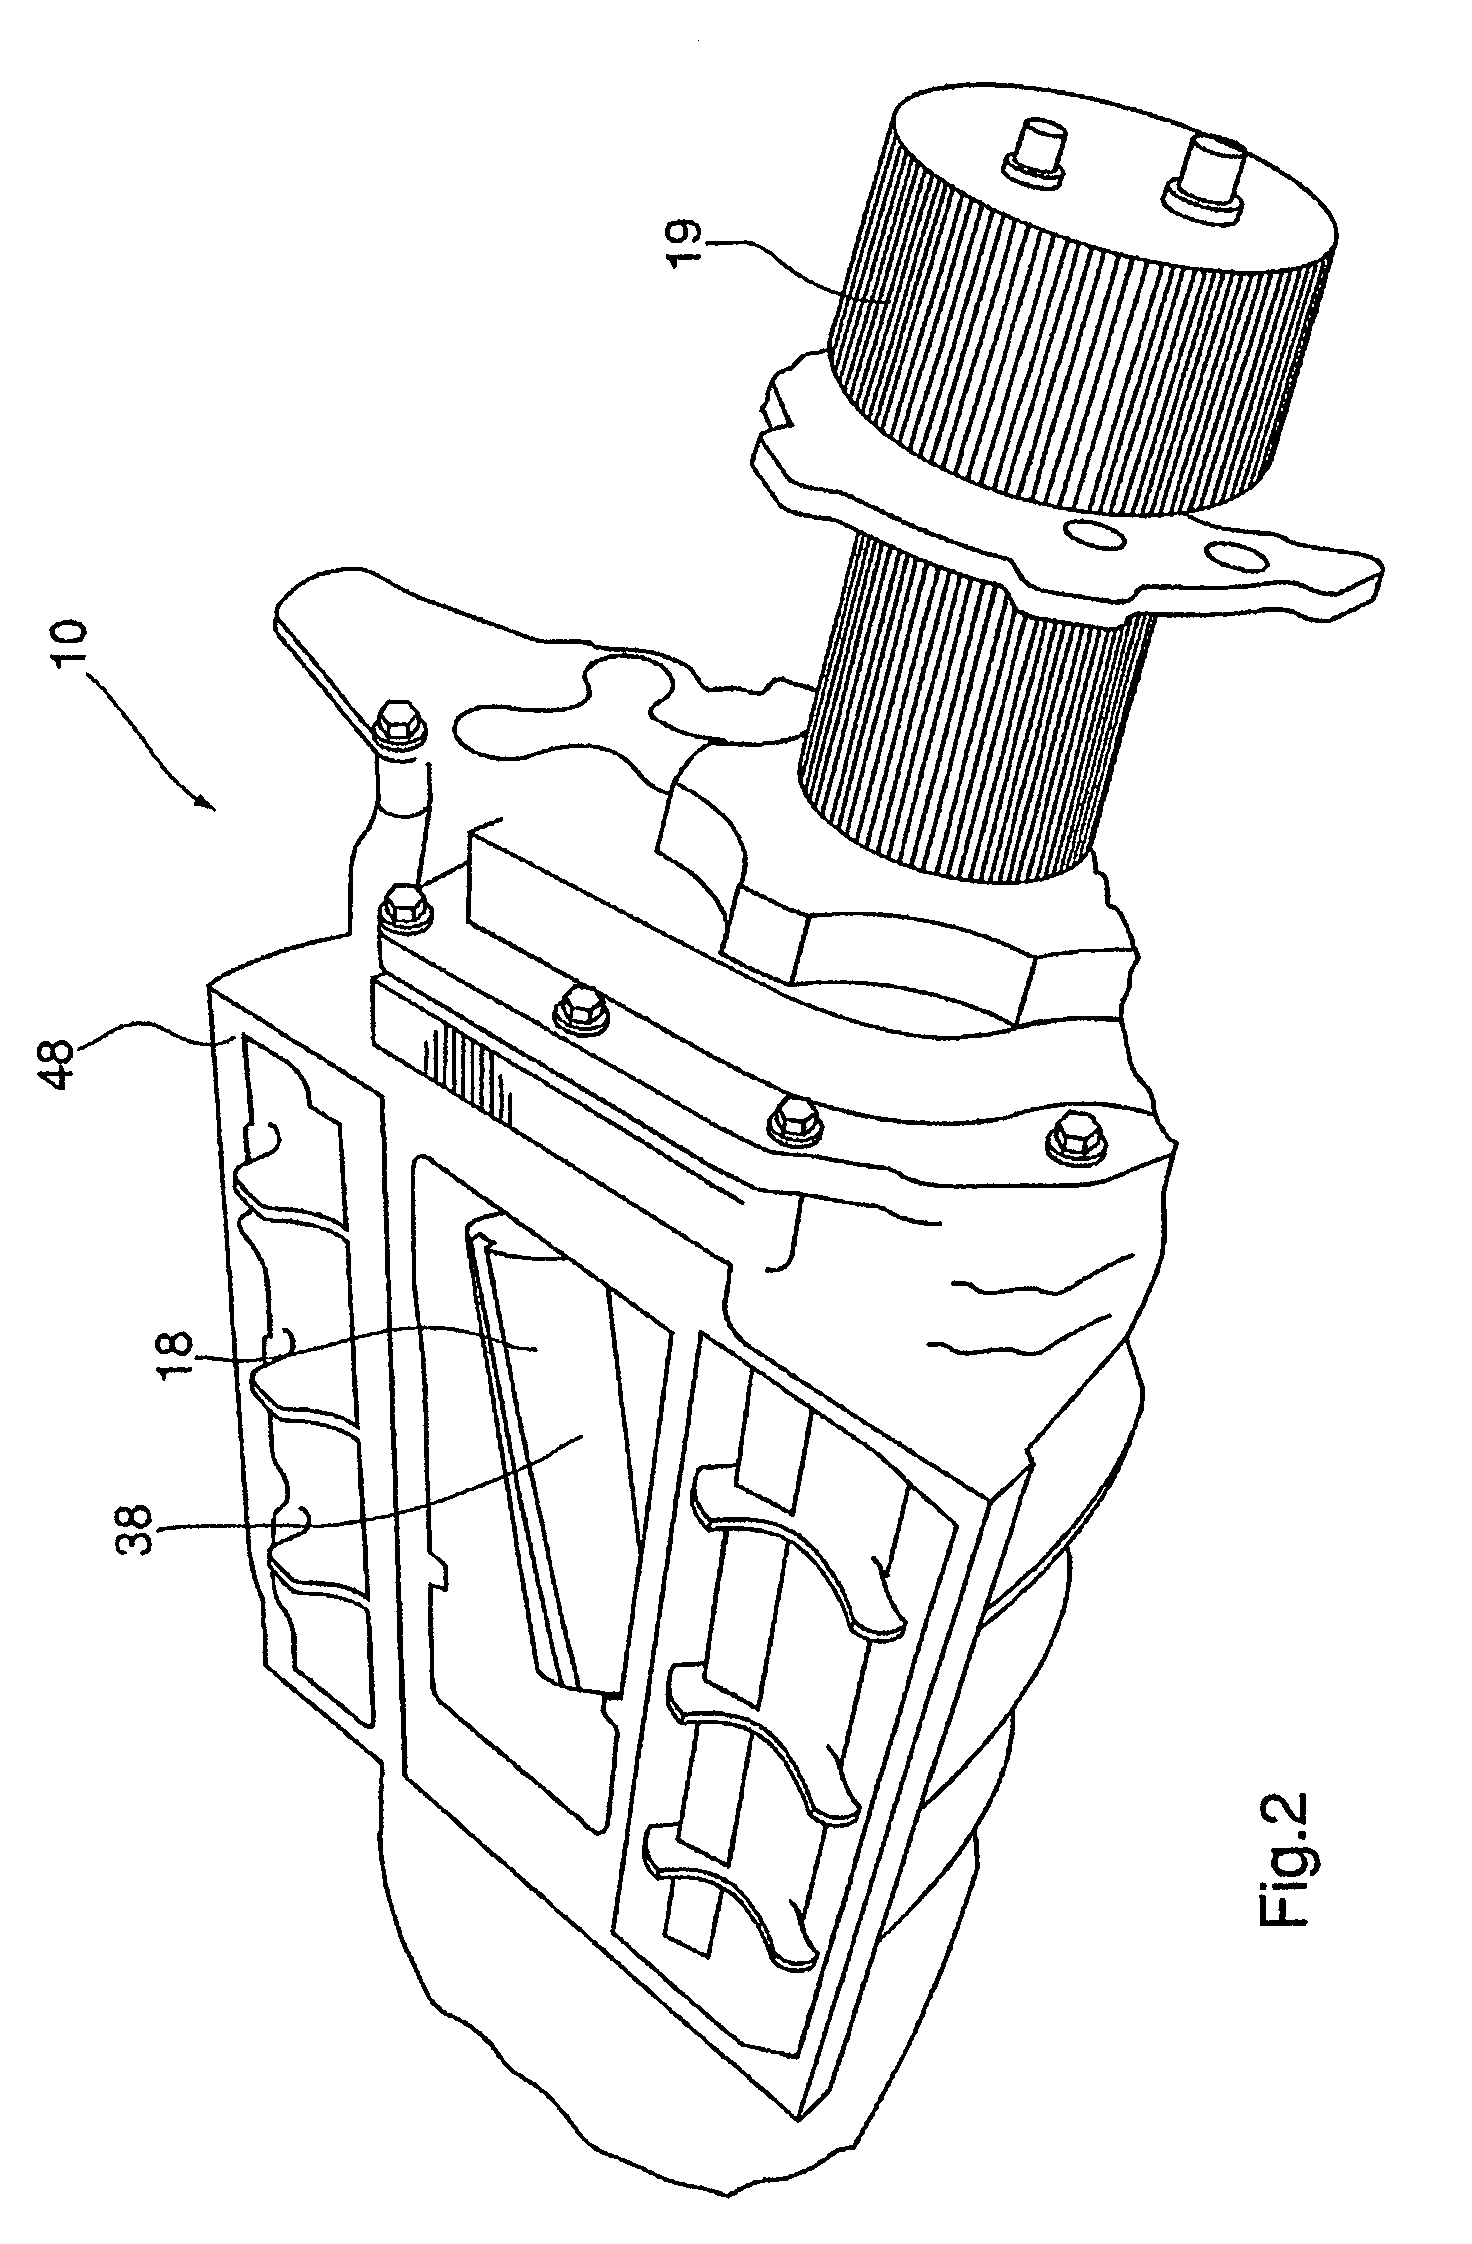 Roots type gear compressor with helical lobes having feedback cavity